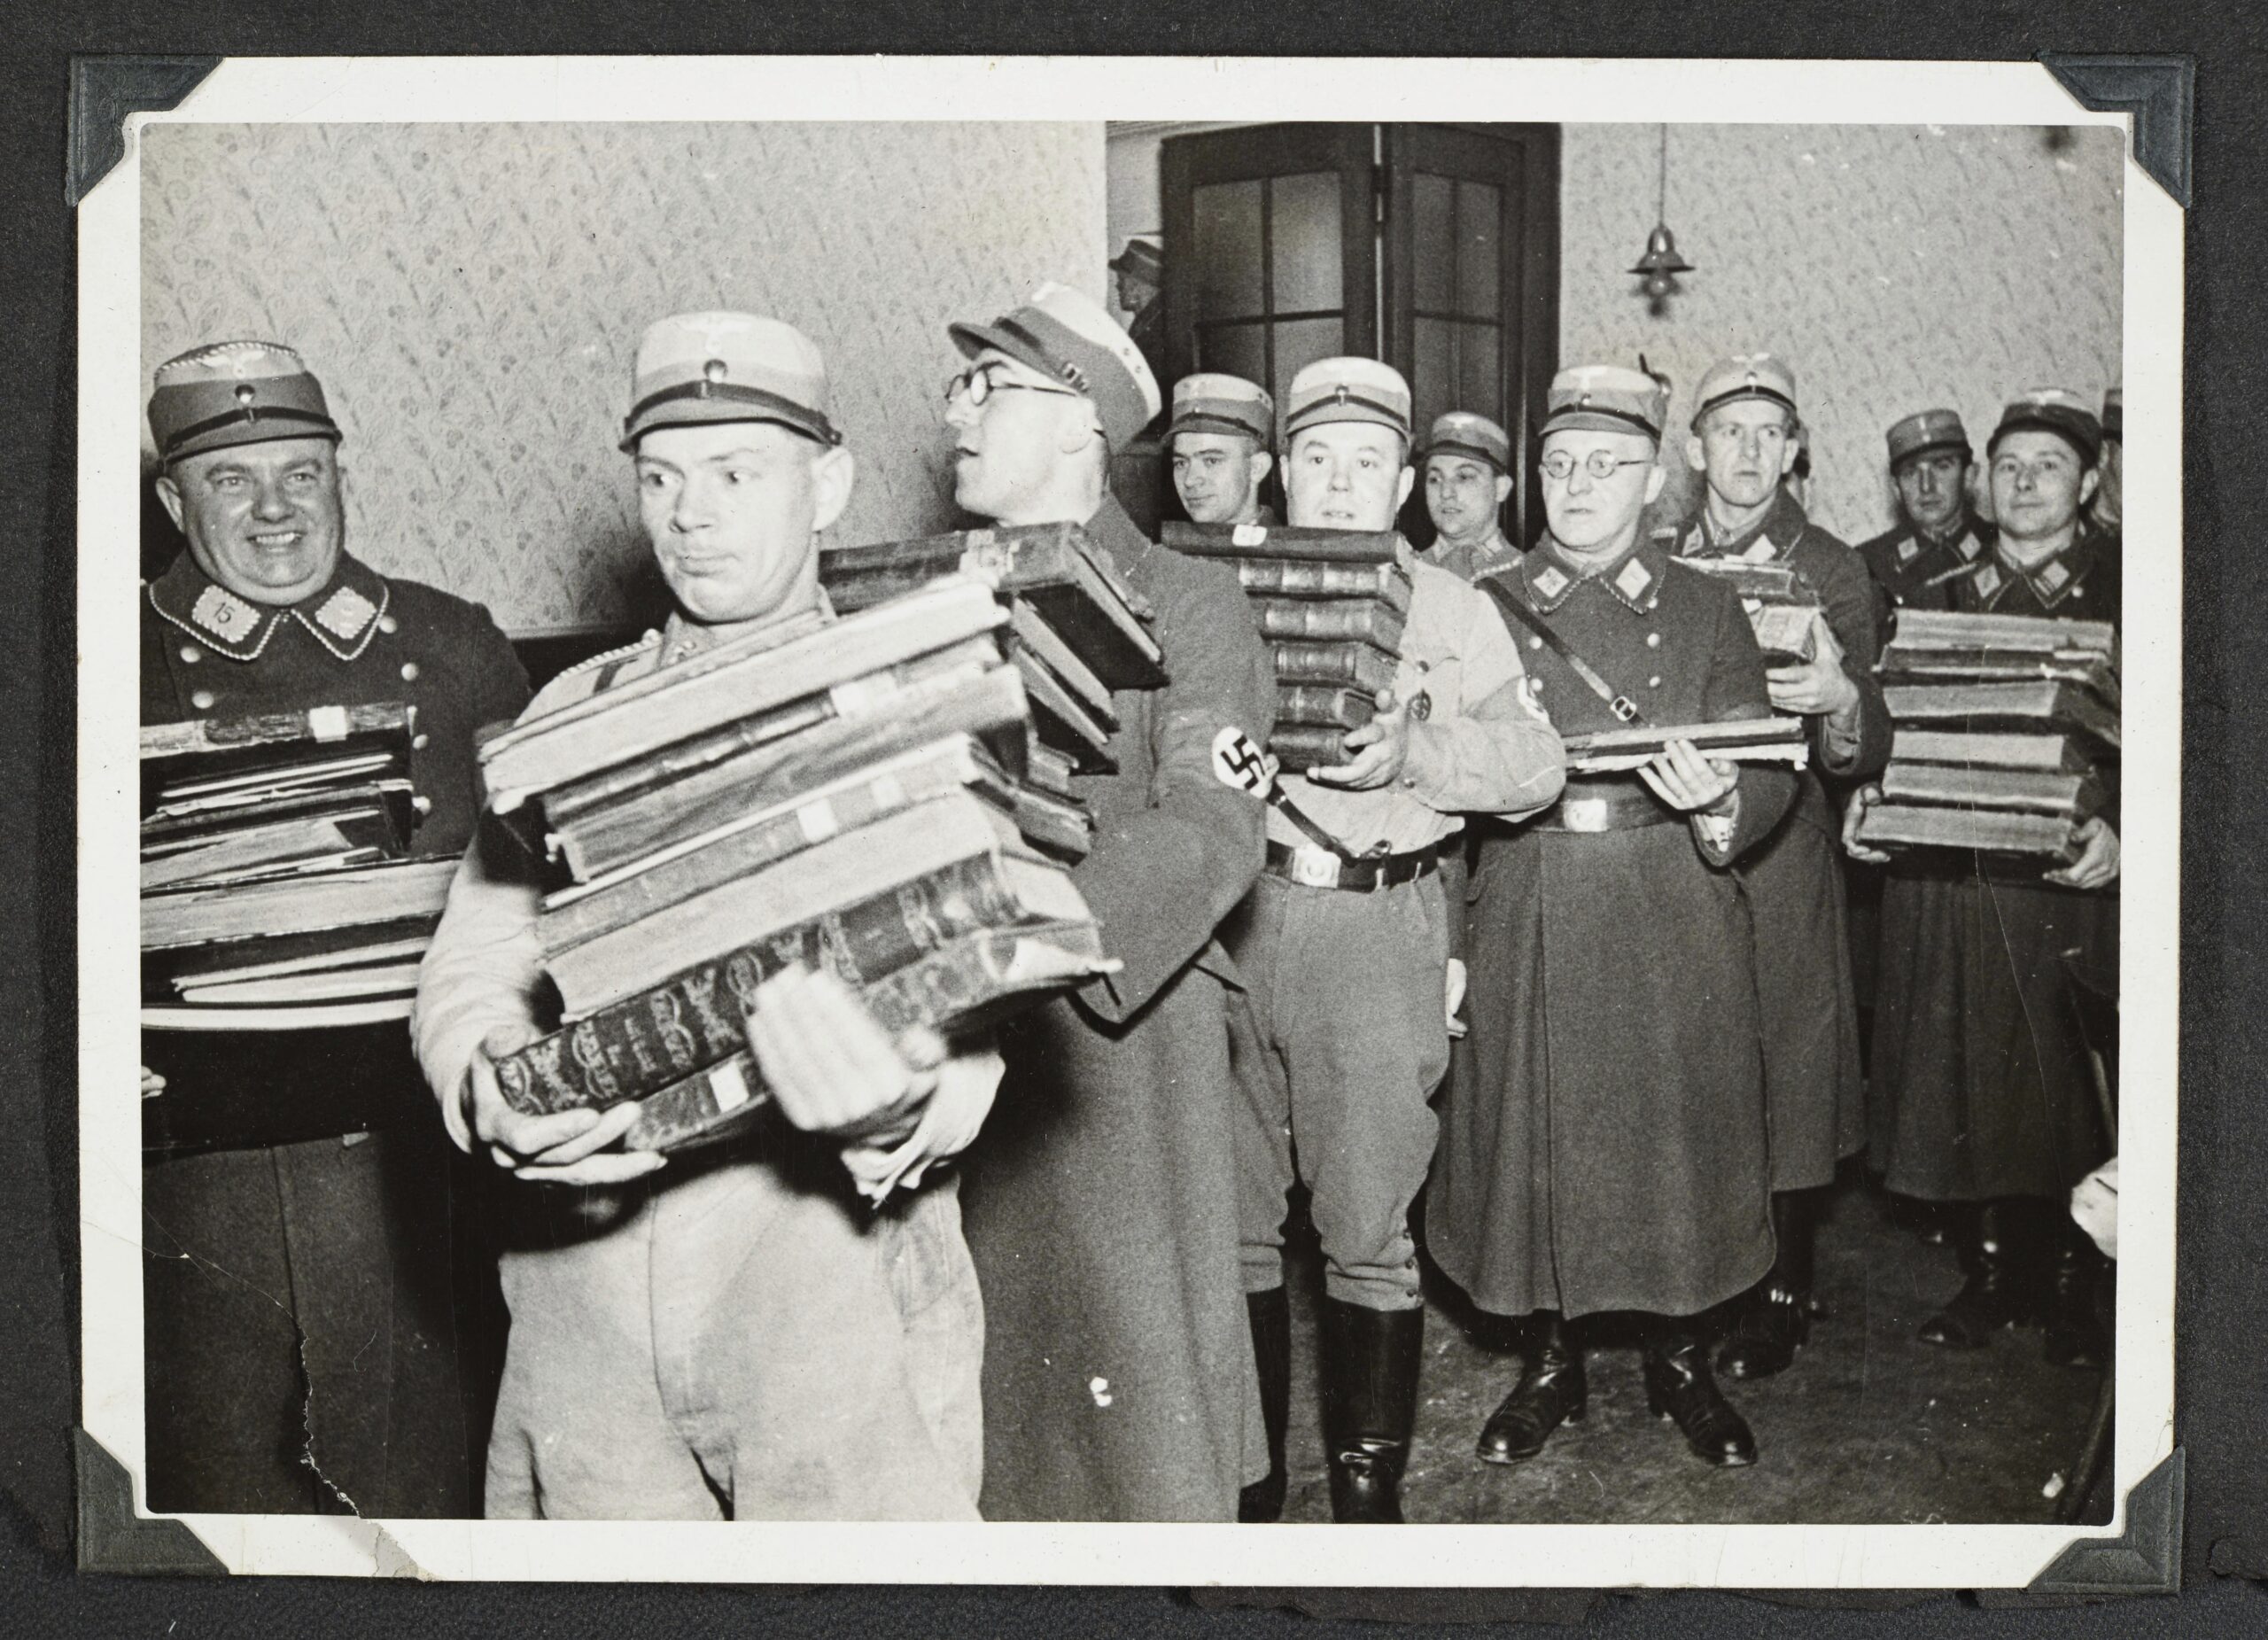 This photo released by Yad Vashem, World Holocaust Remembrance Center, shows German Nazis carry Jewish books, presumably for burning, during Kristallnacht intake most likely in the town of Fuerth, Germany on Nov. 10, 1938. The photos were taken by Nazi photographers during the pogrom in the city of Nuremberg and the nearby town of Fuerth. They wound up in the possession of a Jewish American serviceman who served in Germany during World War II. His descendants,donated the album to Yad Vashem. (Yad Vashem via AP)